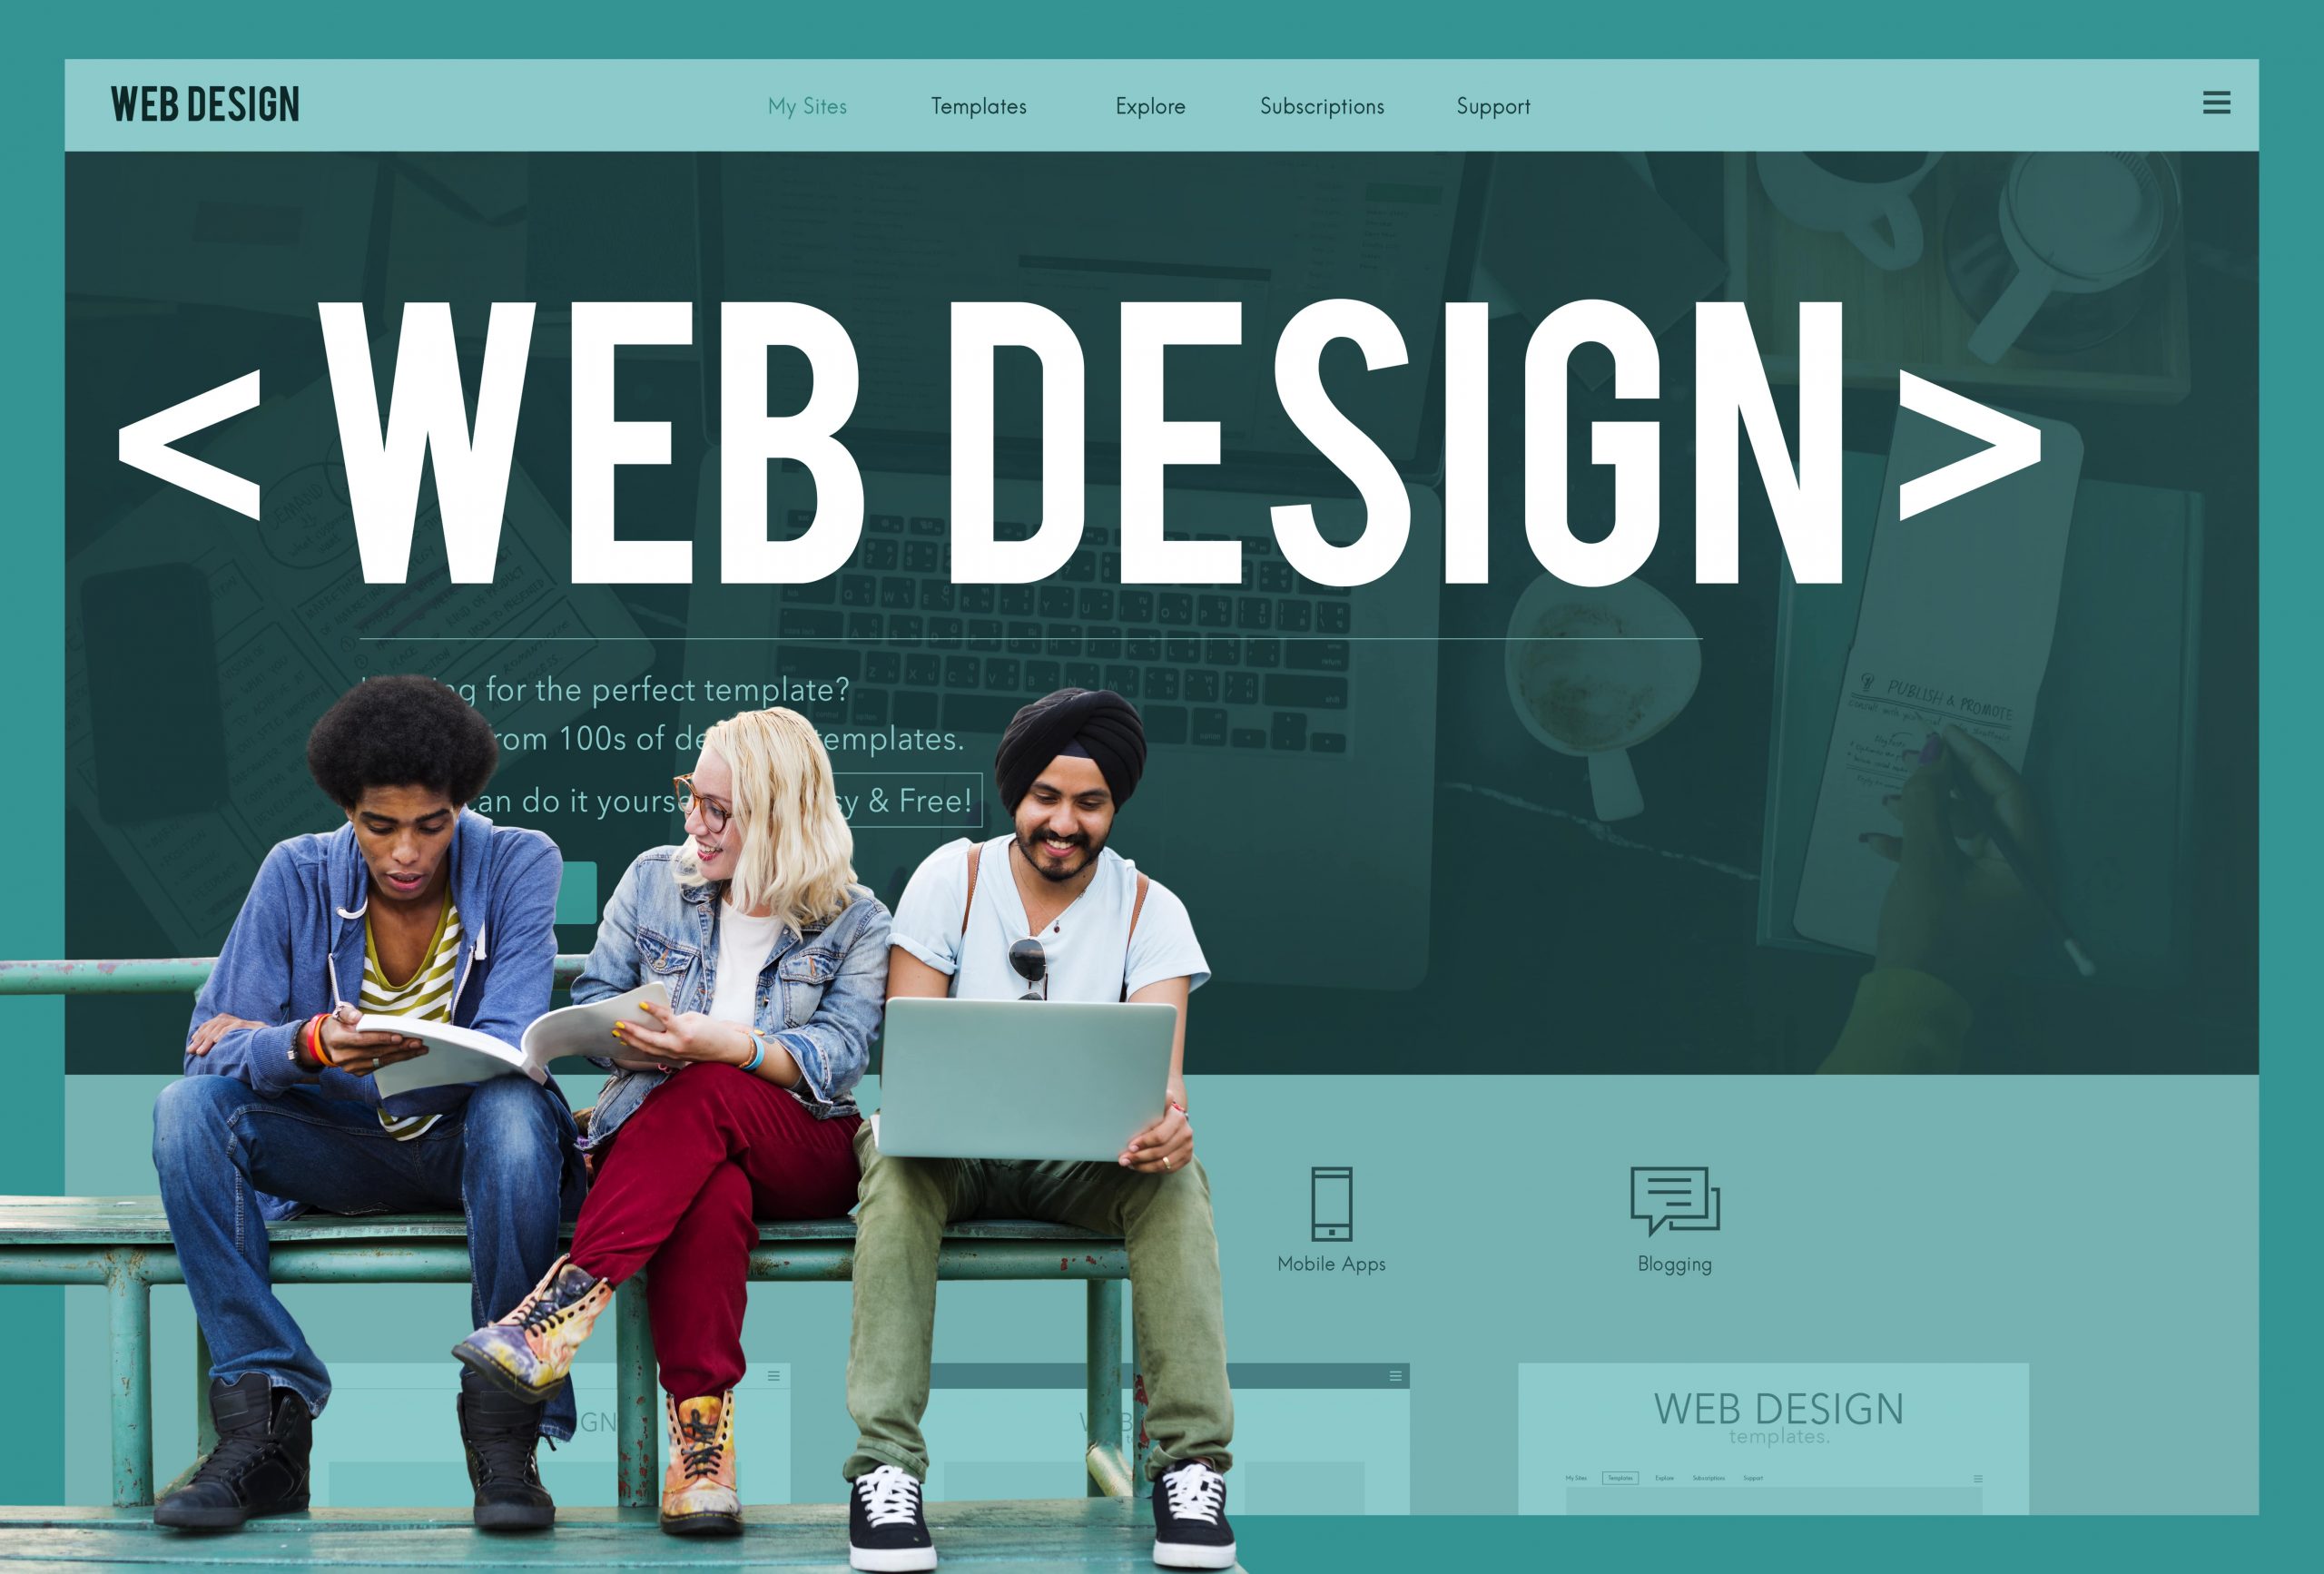 How To Develop A Near Perfect Website For Your Business?